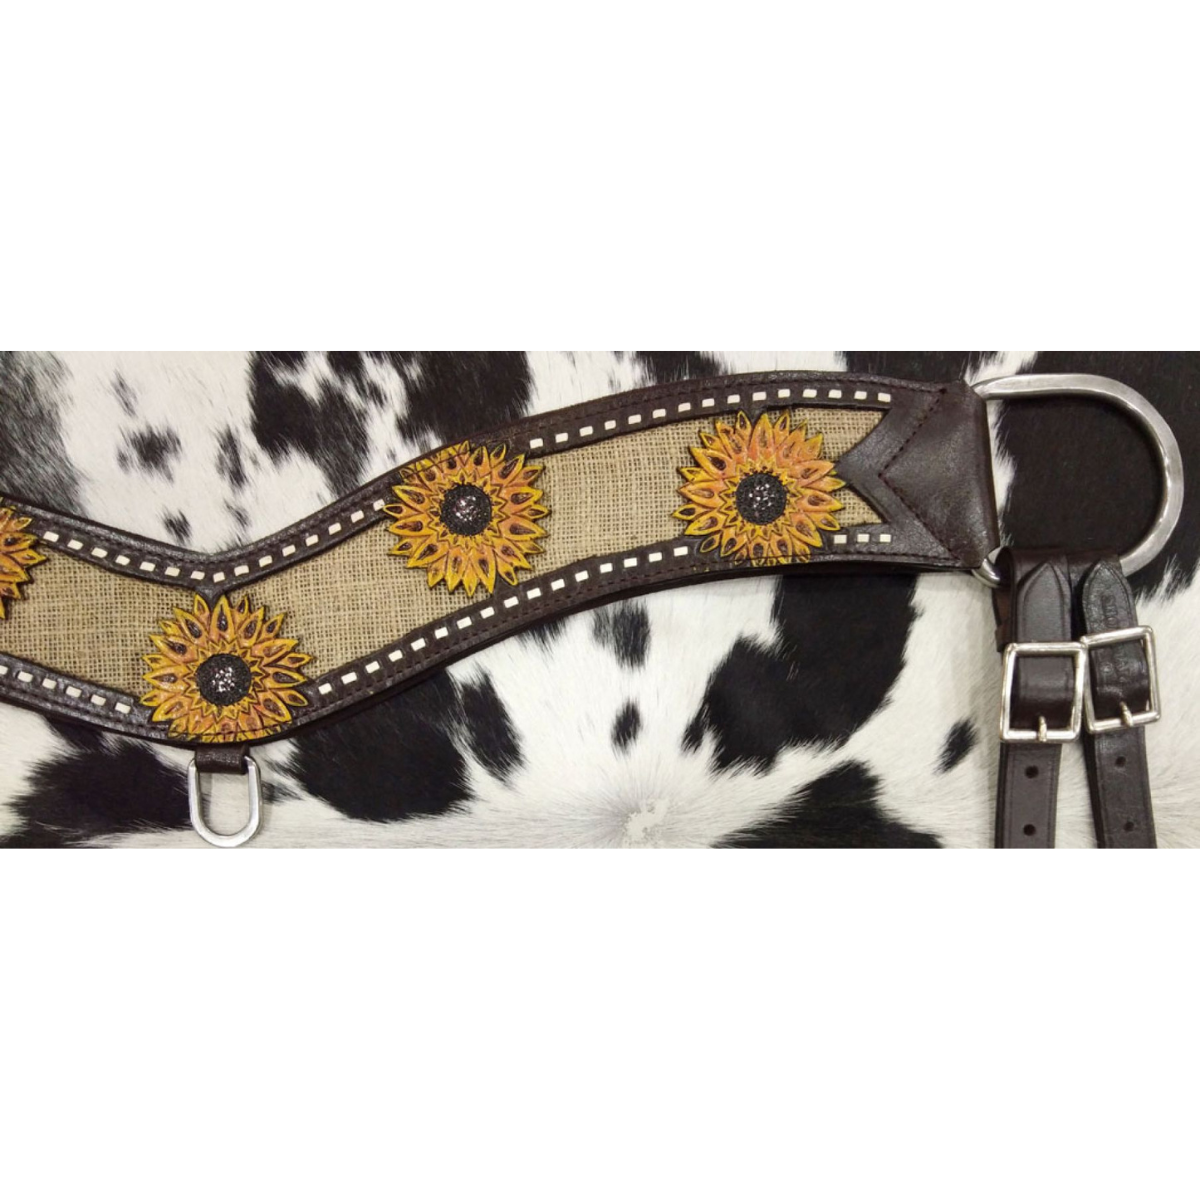 Showman ® Hand Painted Sunflower tripping collar with Burlap Inlay. - Double T Saddles